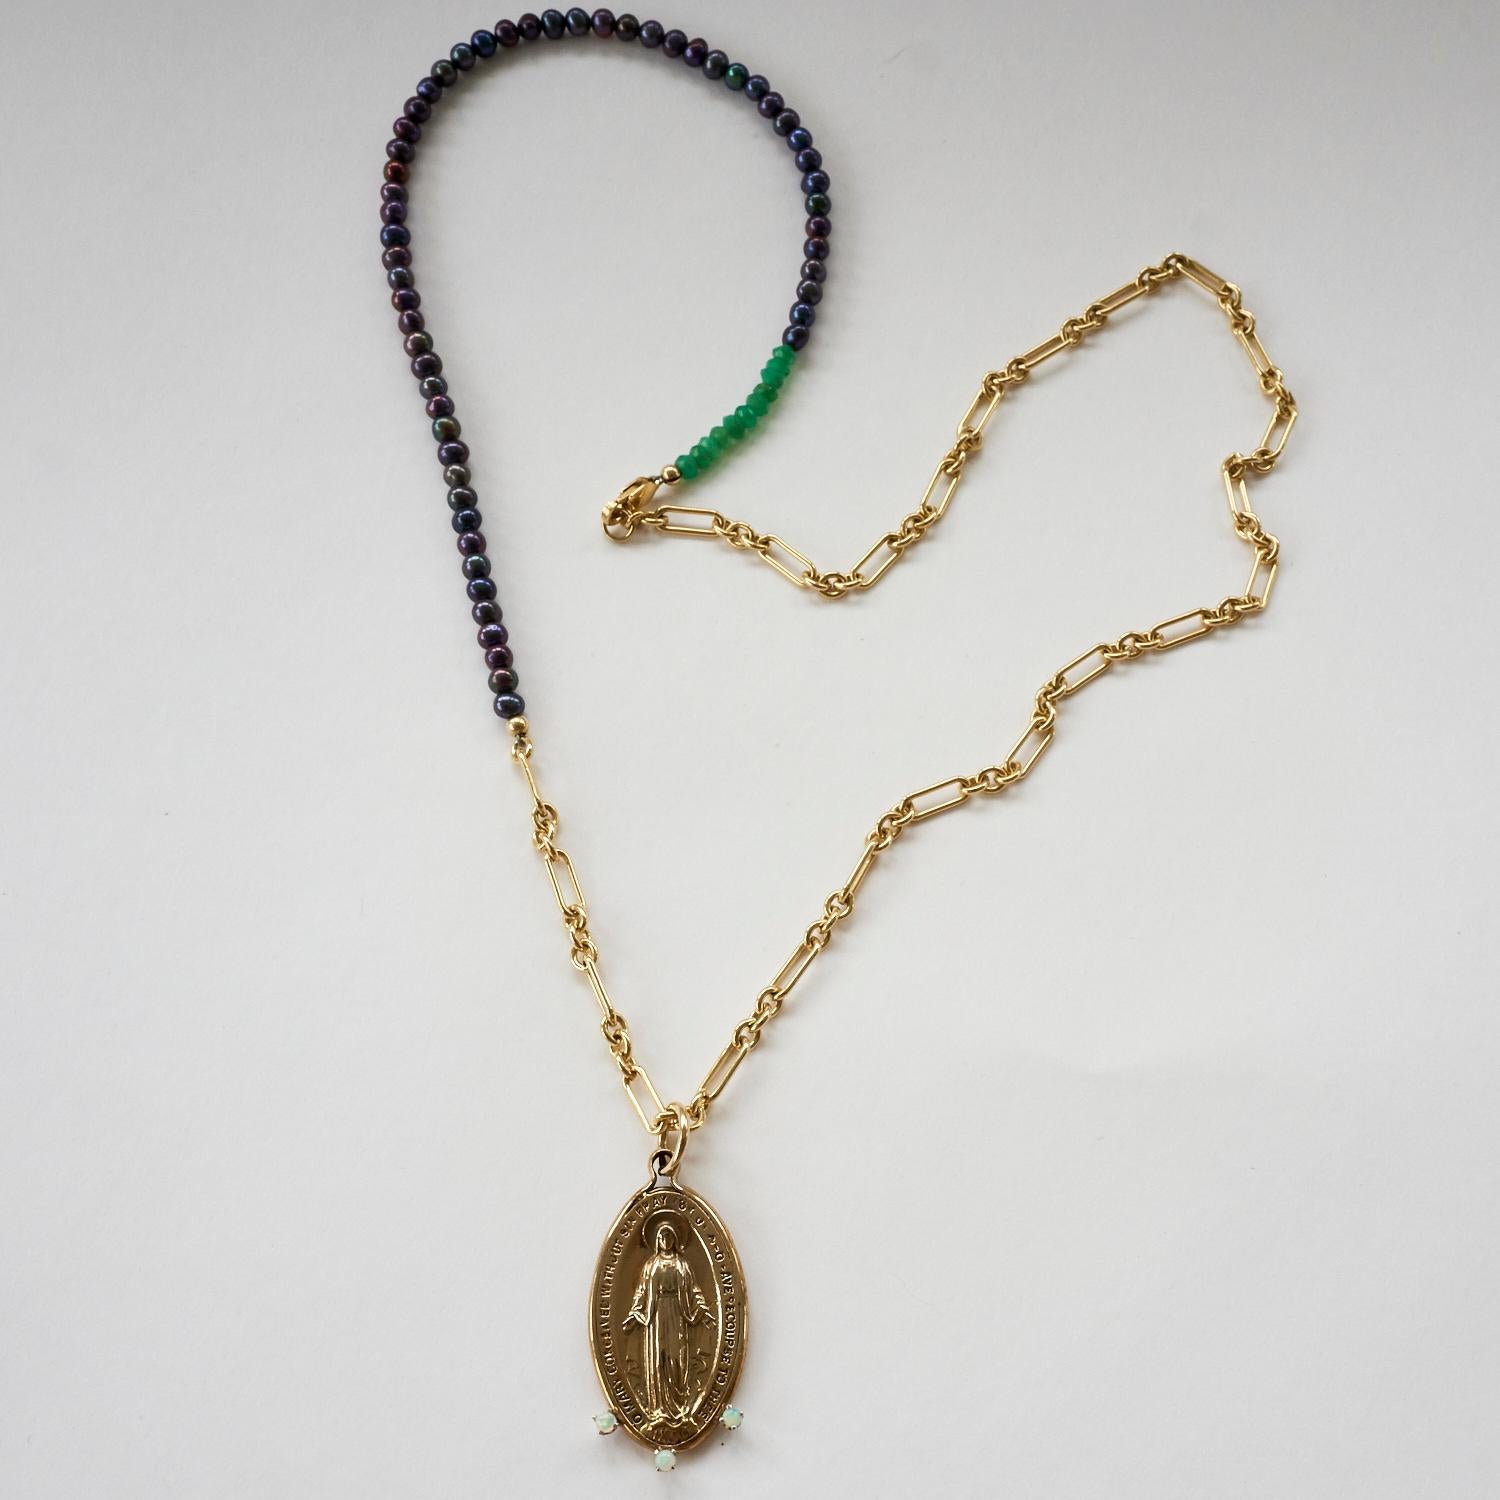 Contemporary Black Bead Chain Necklace Medal Egyptian Oval Virgin Mary Opals J Dauphin For Sale